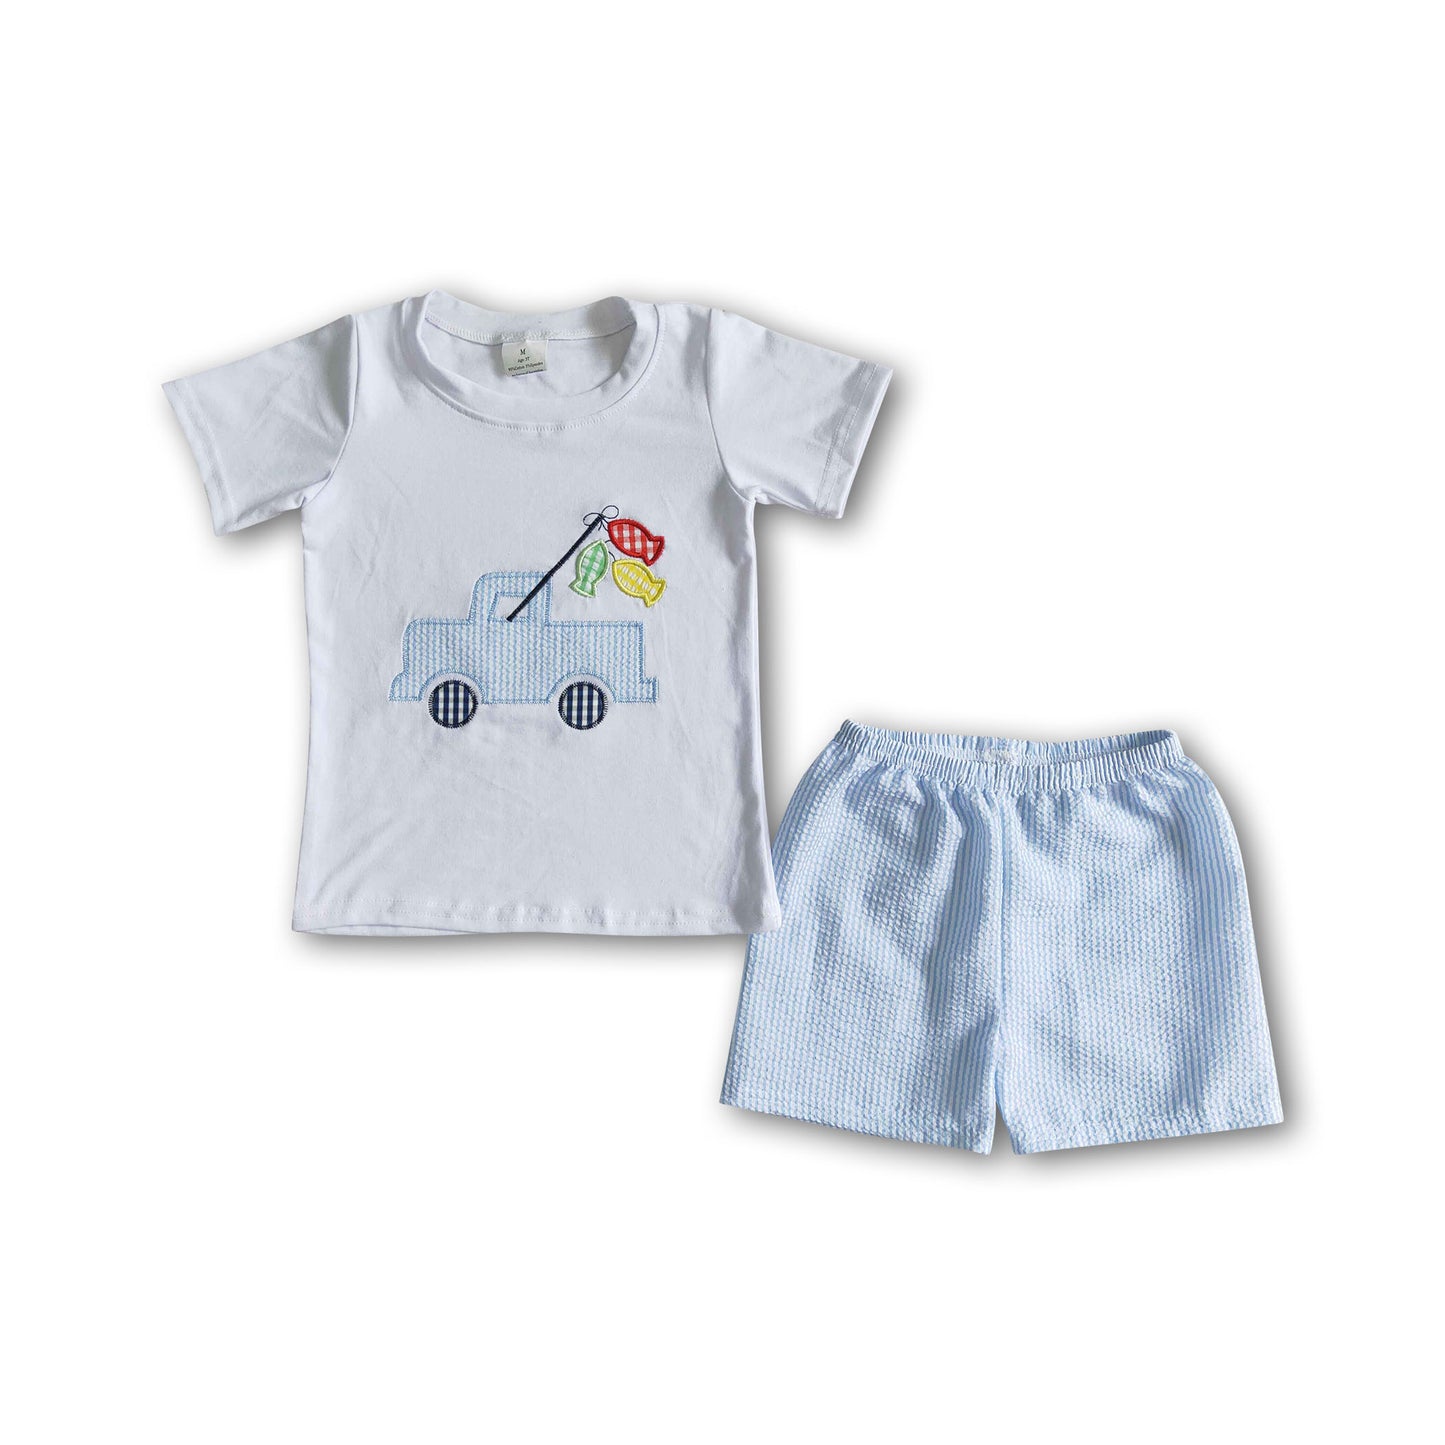 Fishing truck embroidery baby boy summer clothes